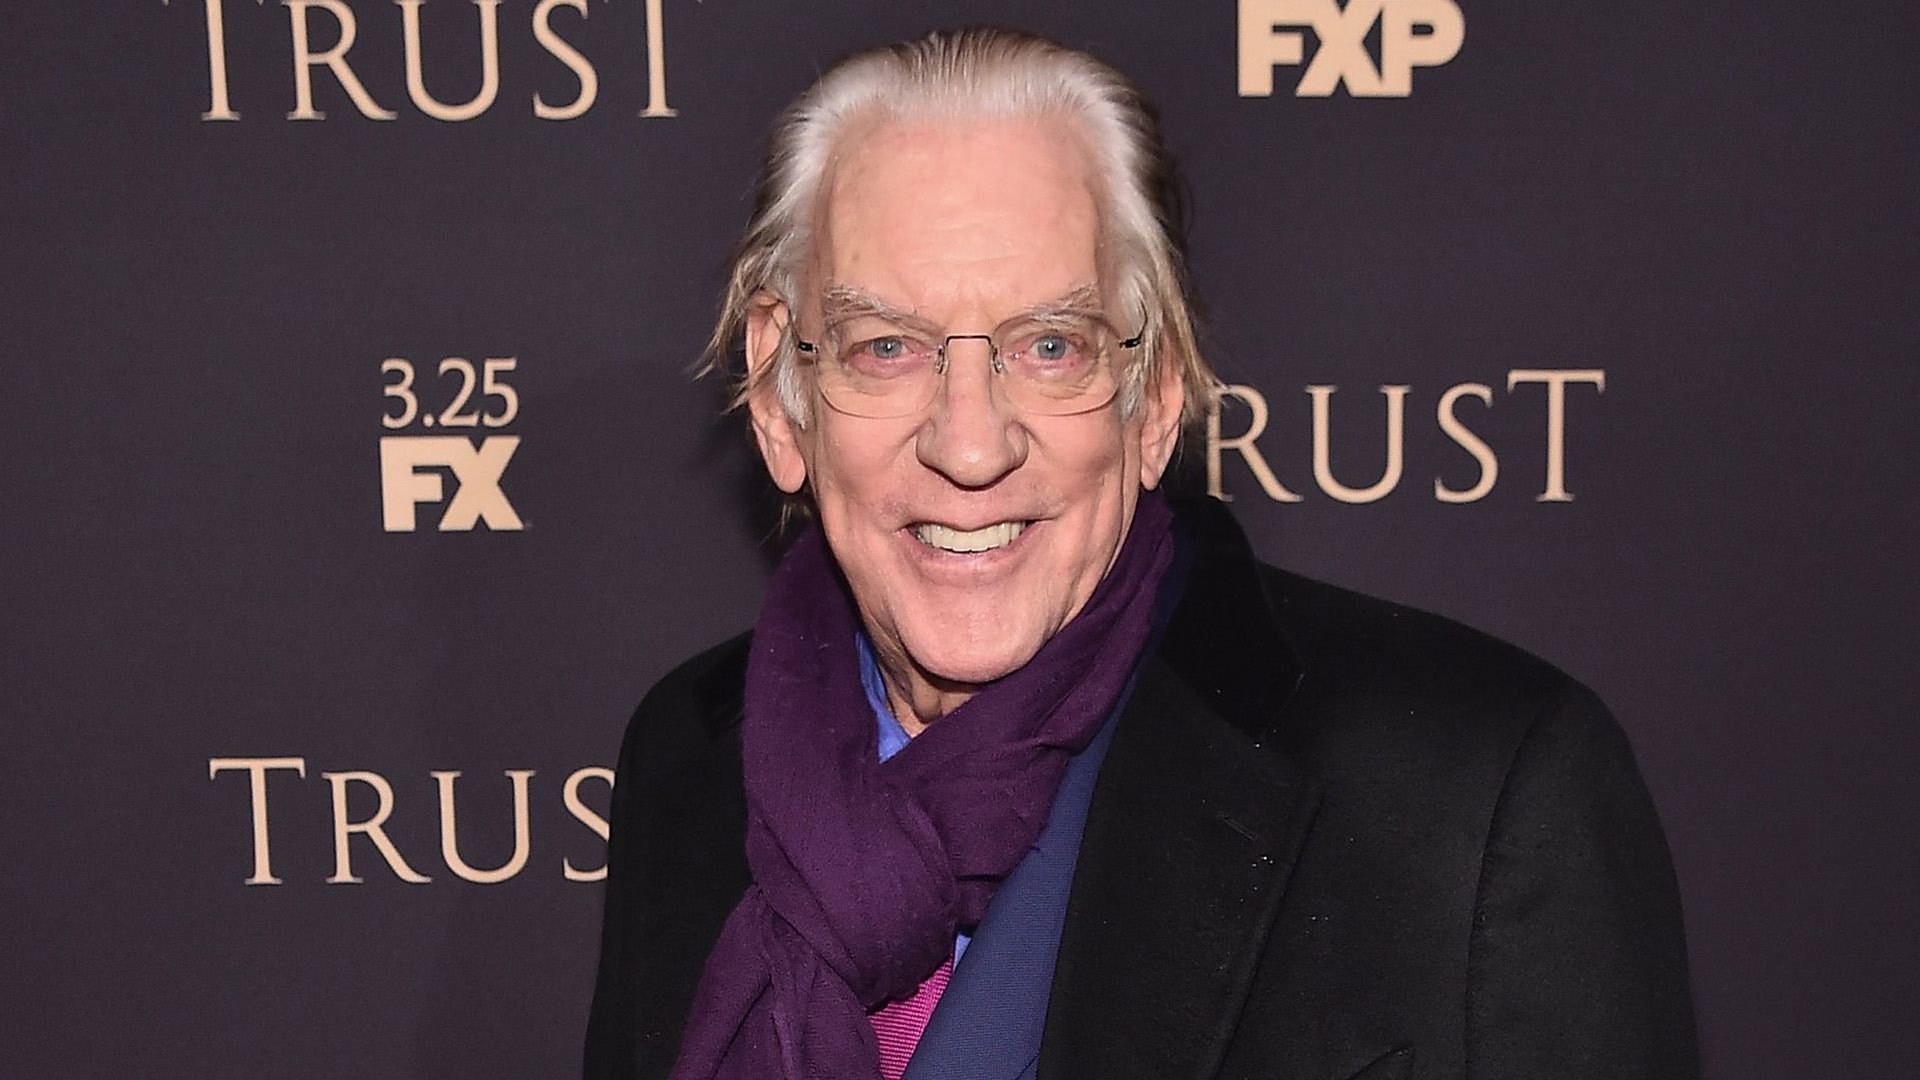 Tributes pour in for actor Donald Sutherland, who died at 88